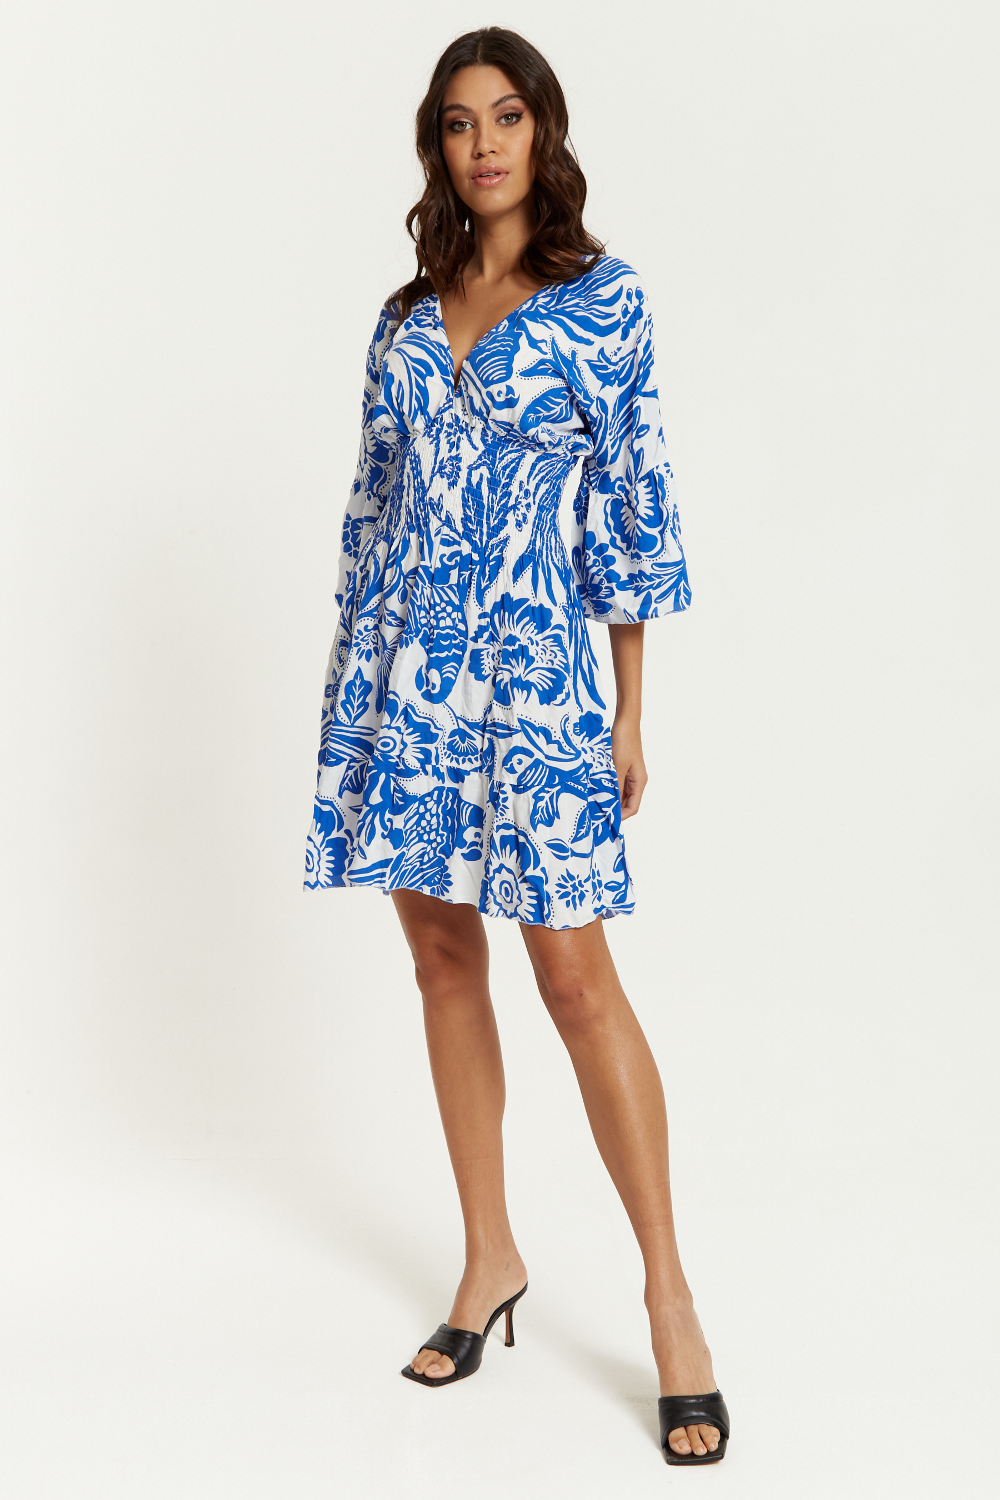 Oversized V Neck Detailed Floral Print Mini Dress in Blue and White GLR FASHION NETWORKING